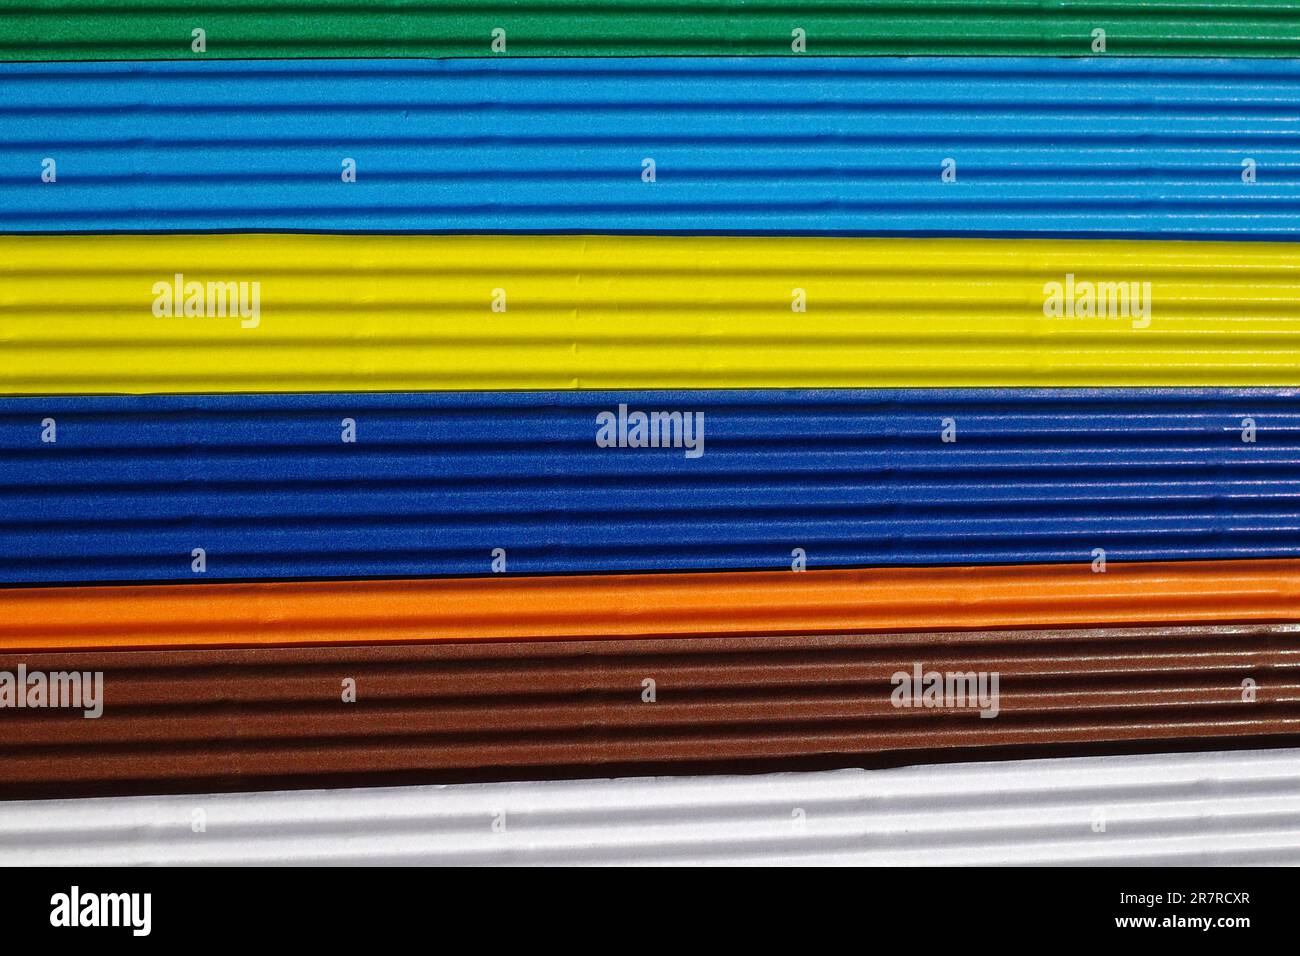 Horizontally ribbed cardboard with the colors white, brown, orange, indigo, yellow, blue, green. Meant as background Stock Photo